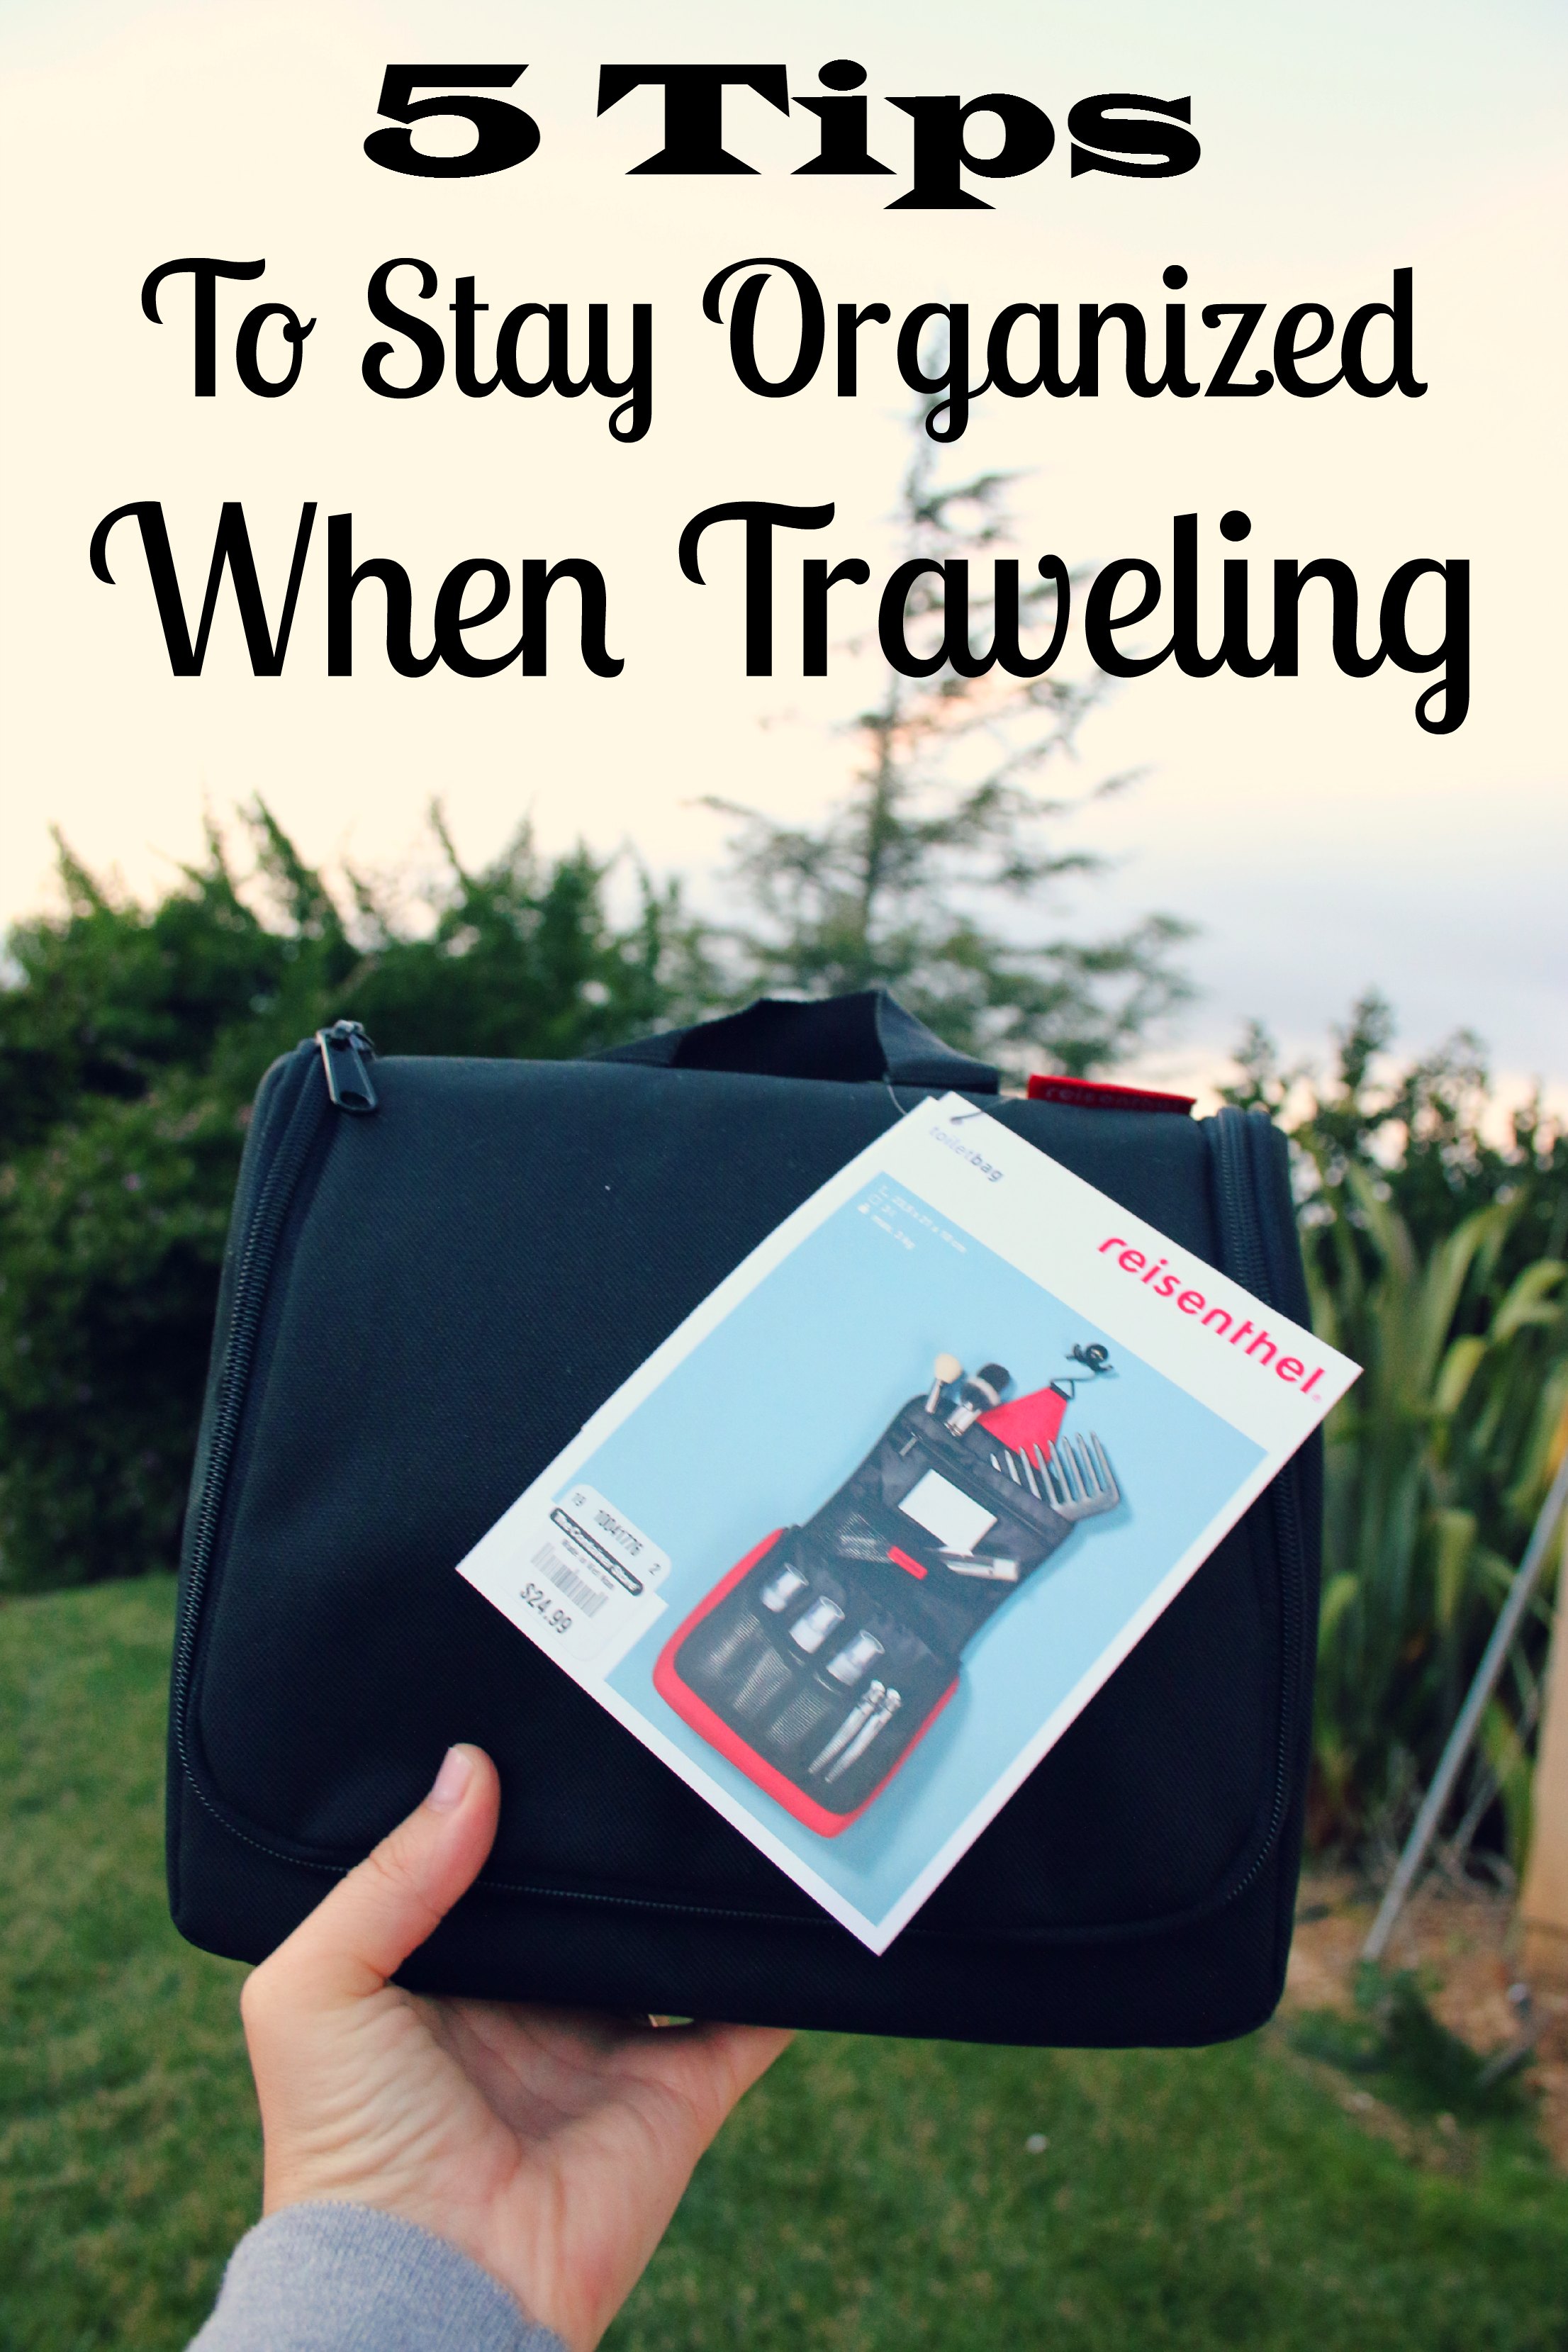 5 tips to stay organized when traveling